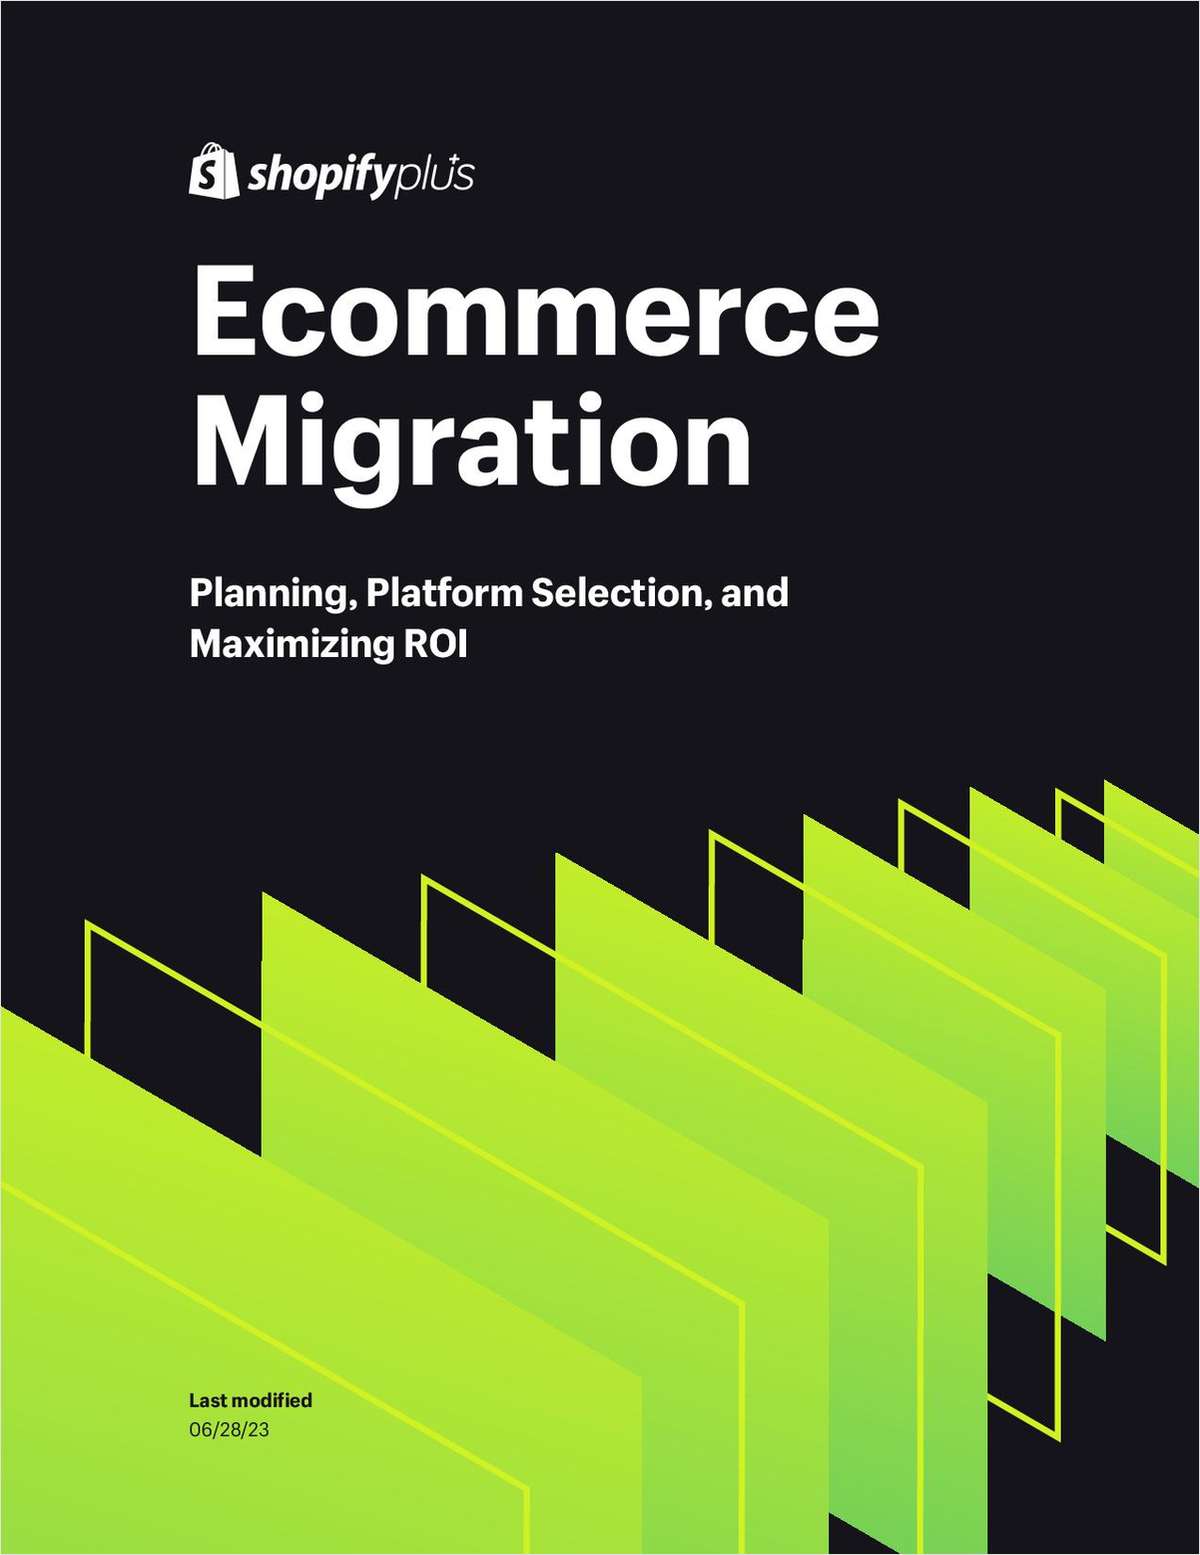 Guide to Successful eCommerce Migration Planning and Platform Selection